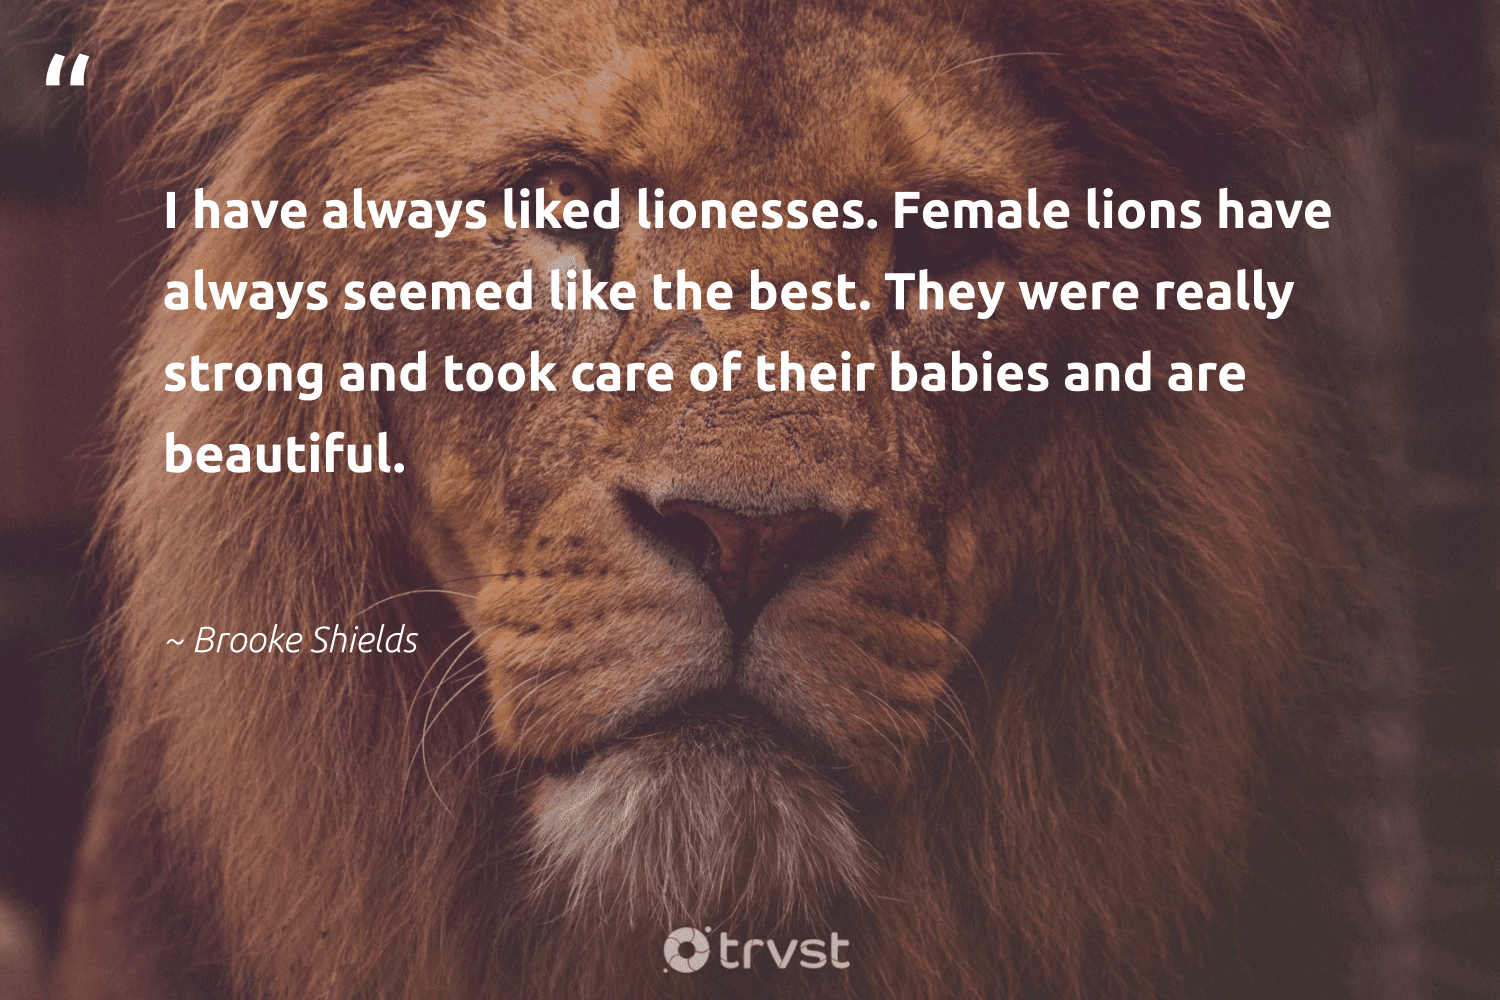 Lion Quotes - 42 Inspirational Lion Sayings & Famous Quotes